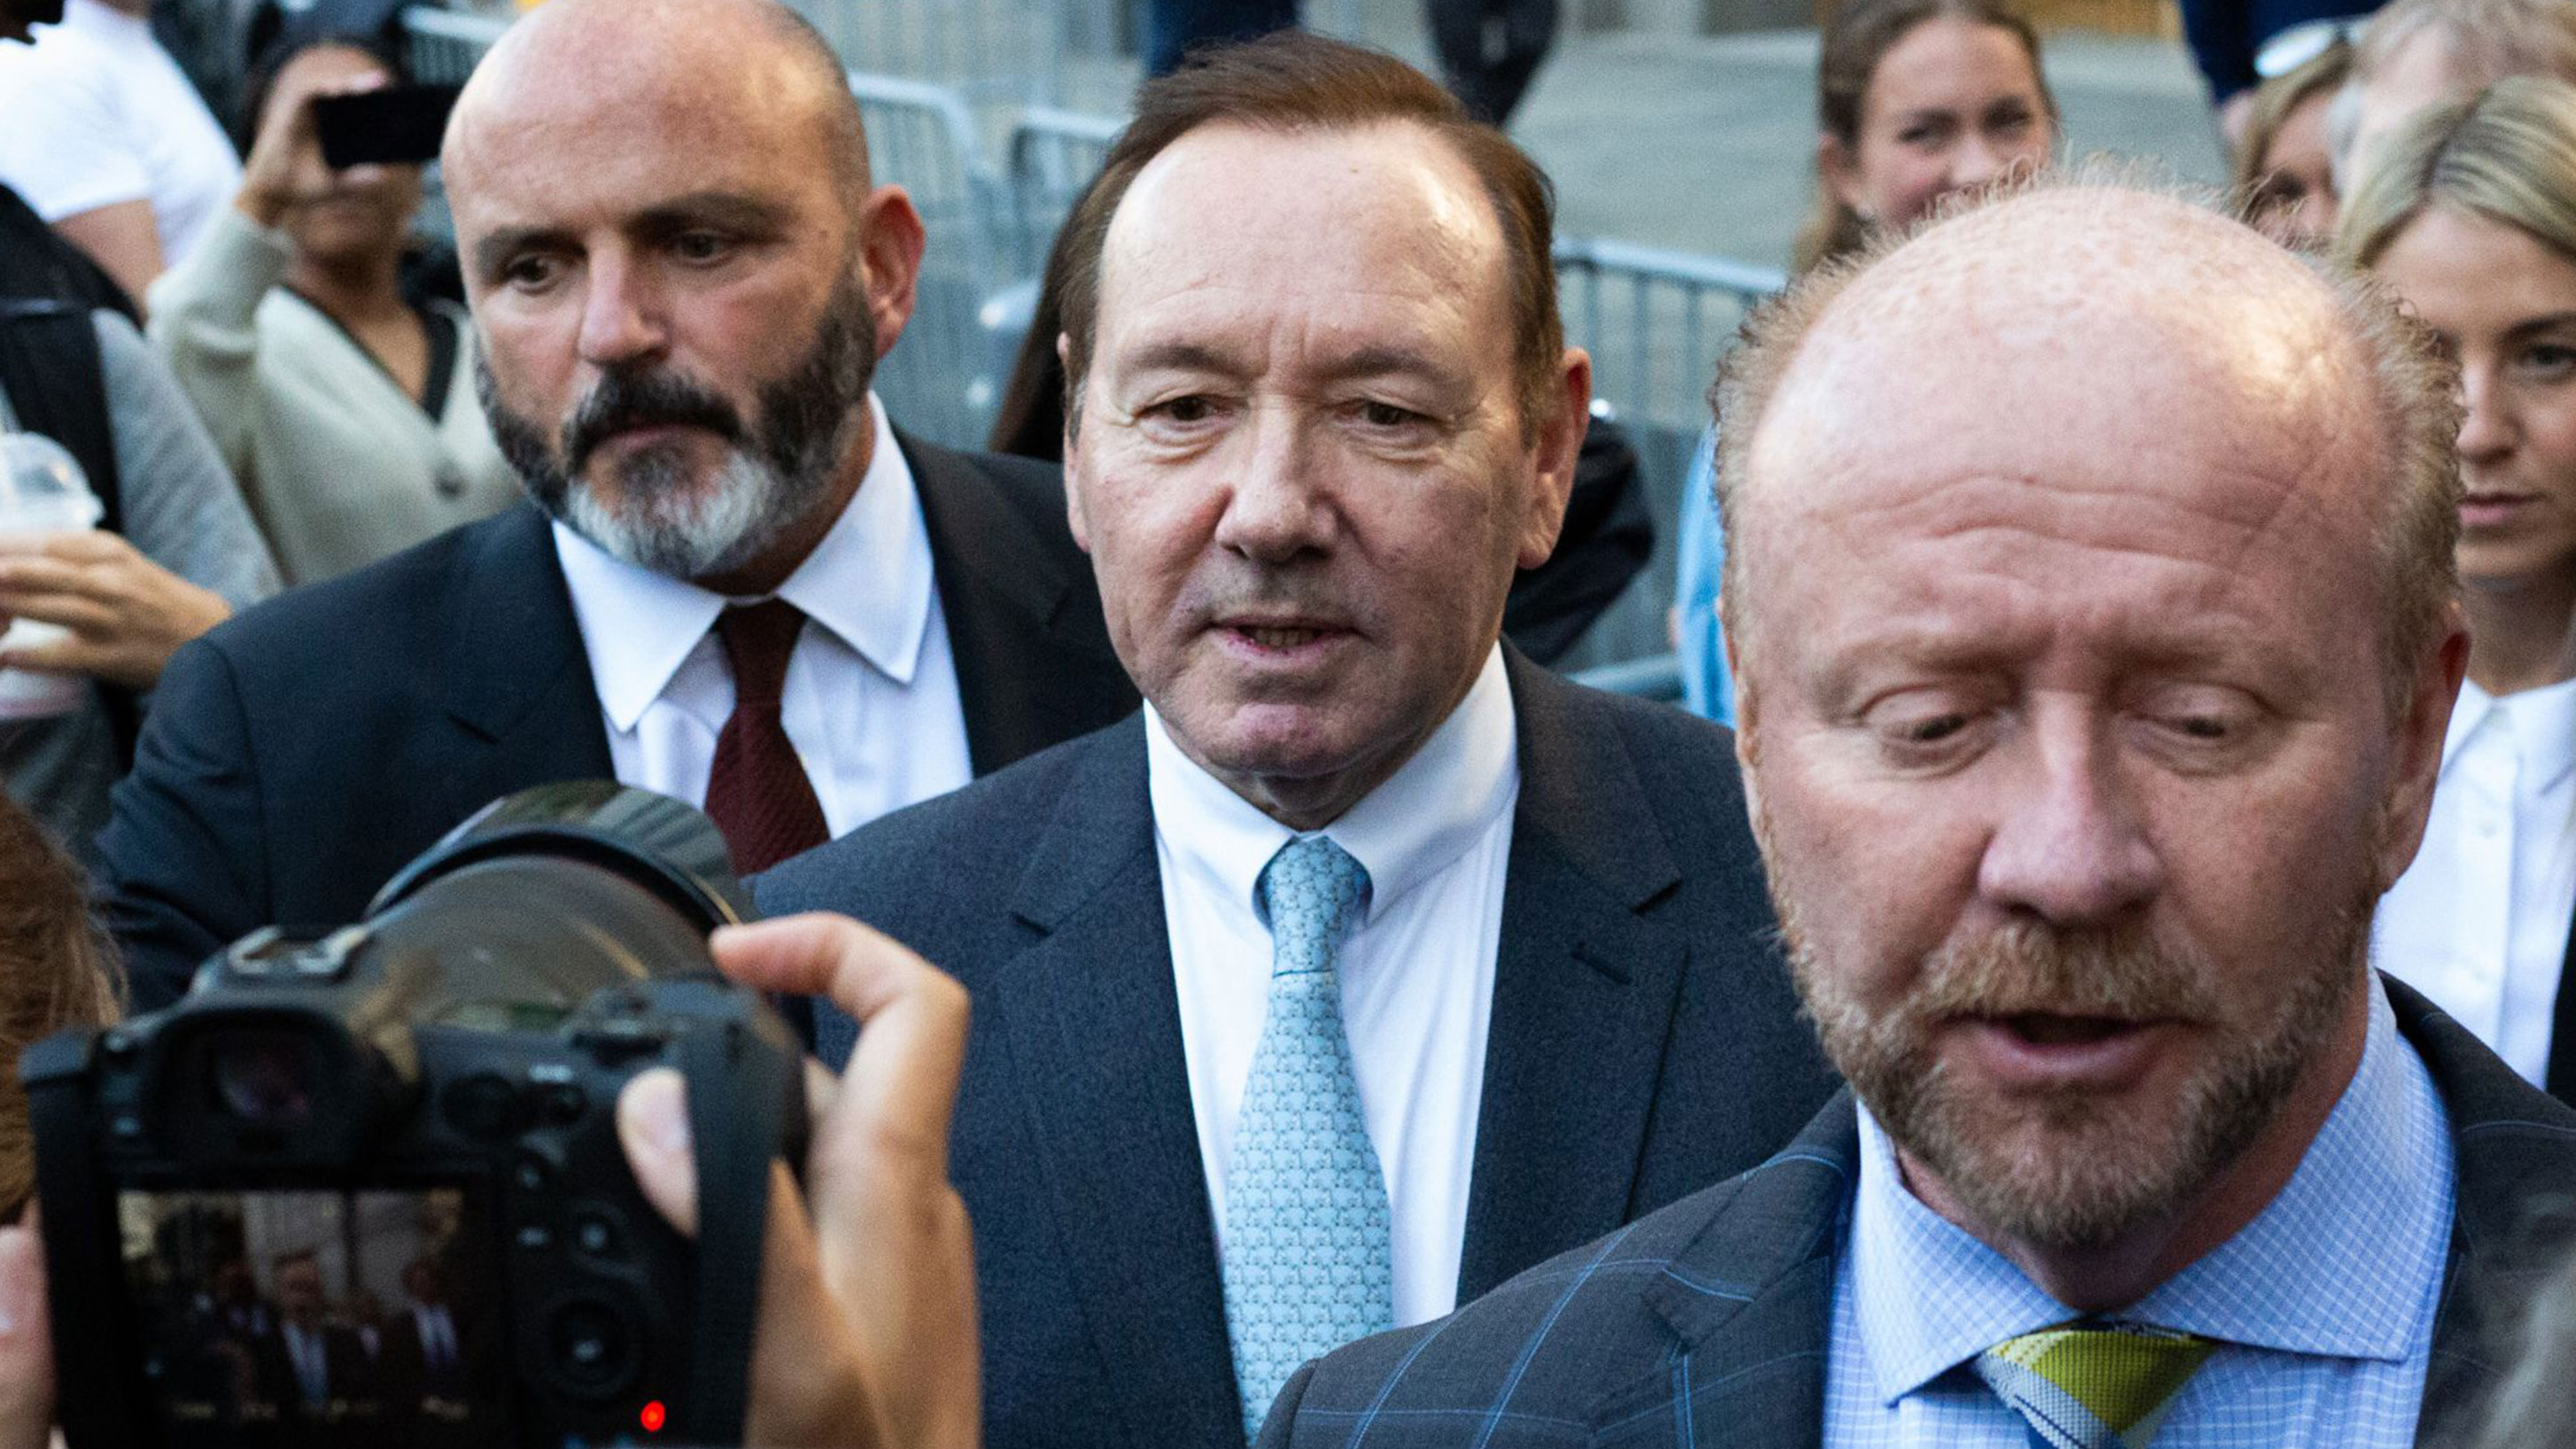 Kevin Spacey arrives at court